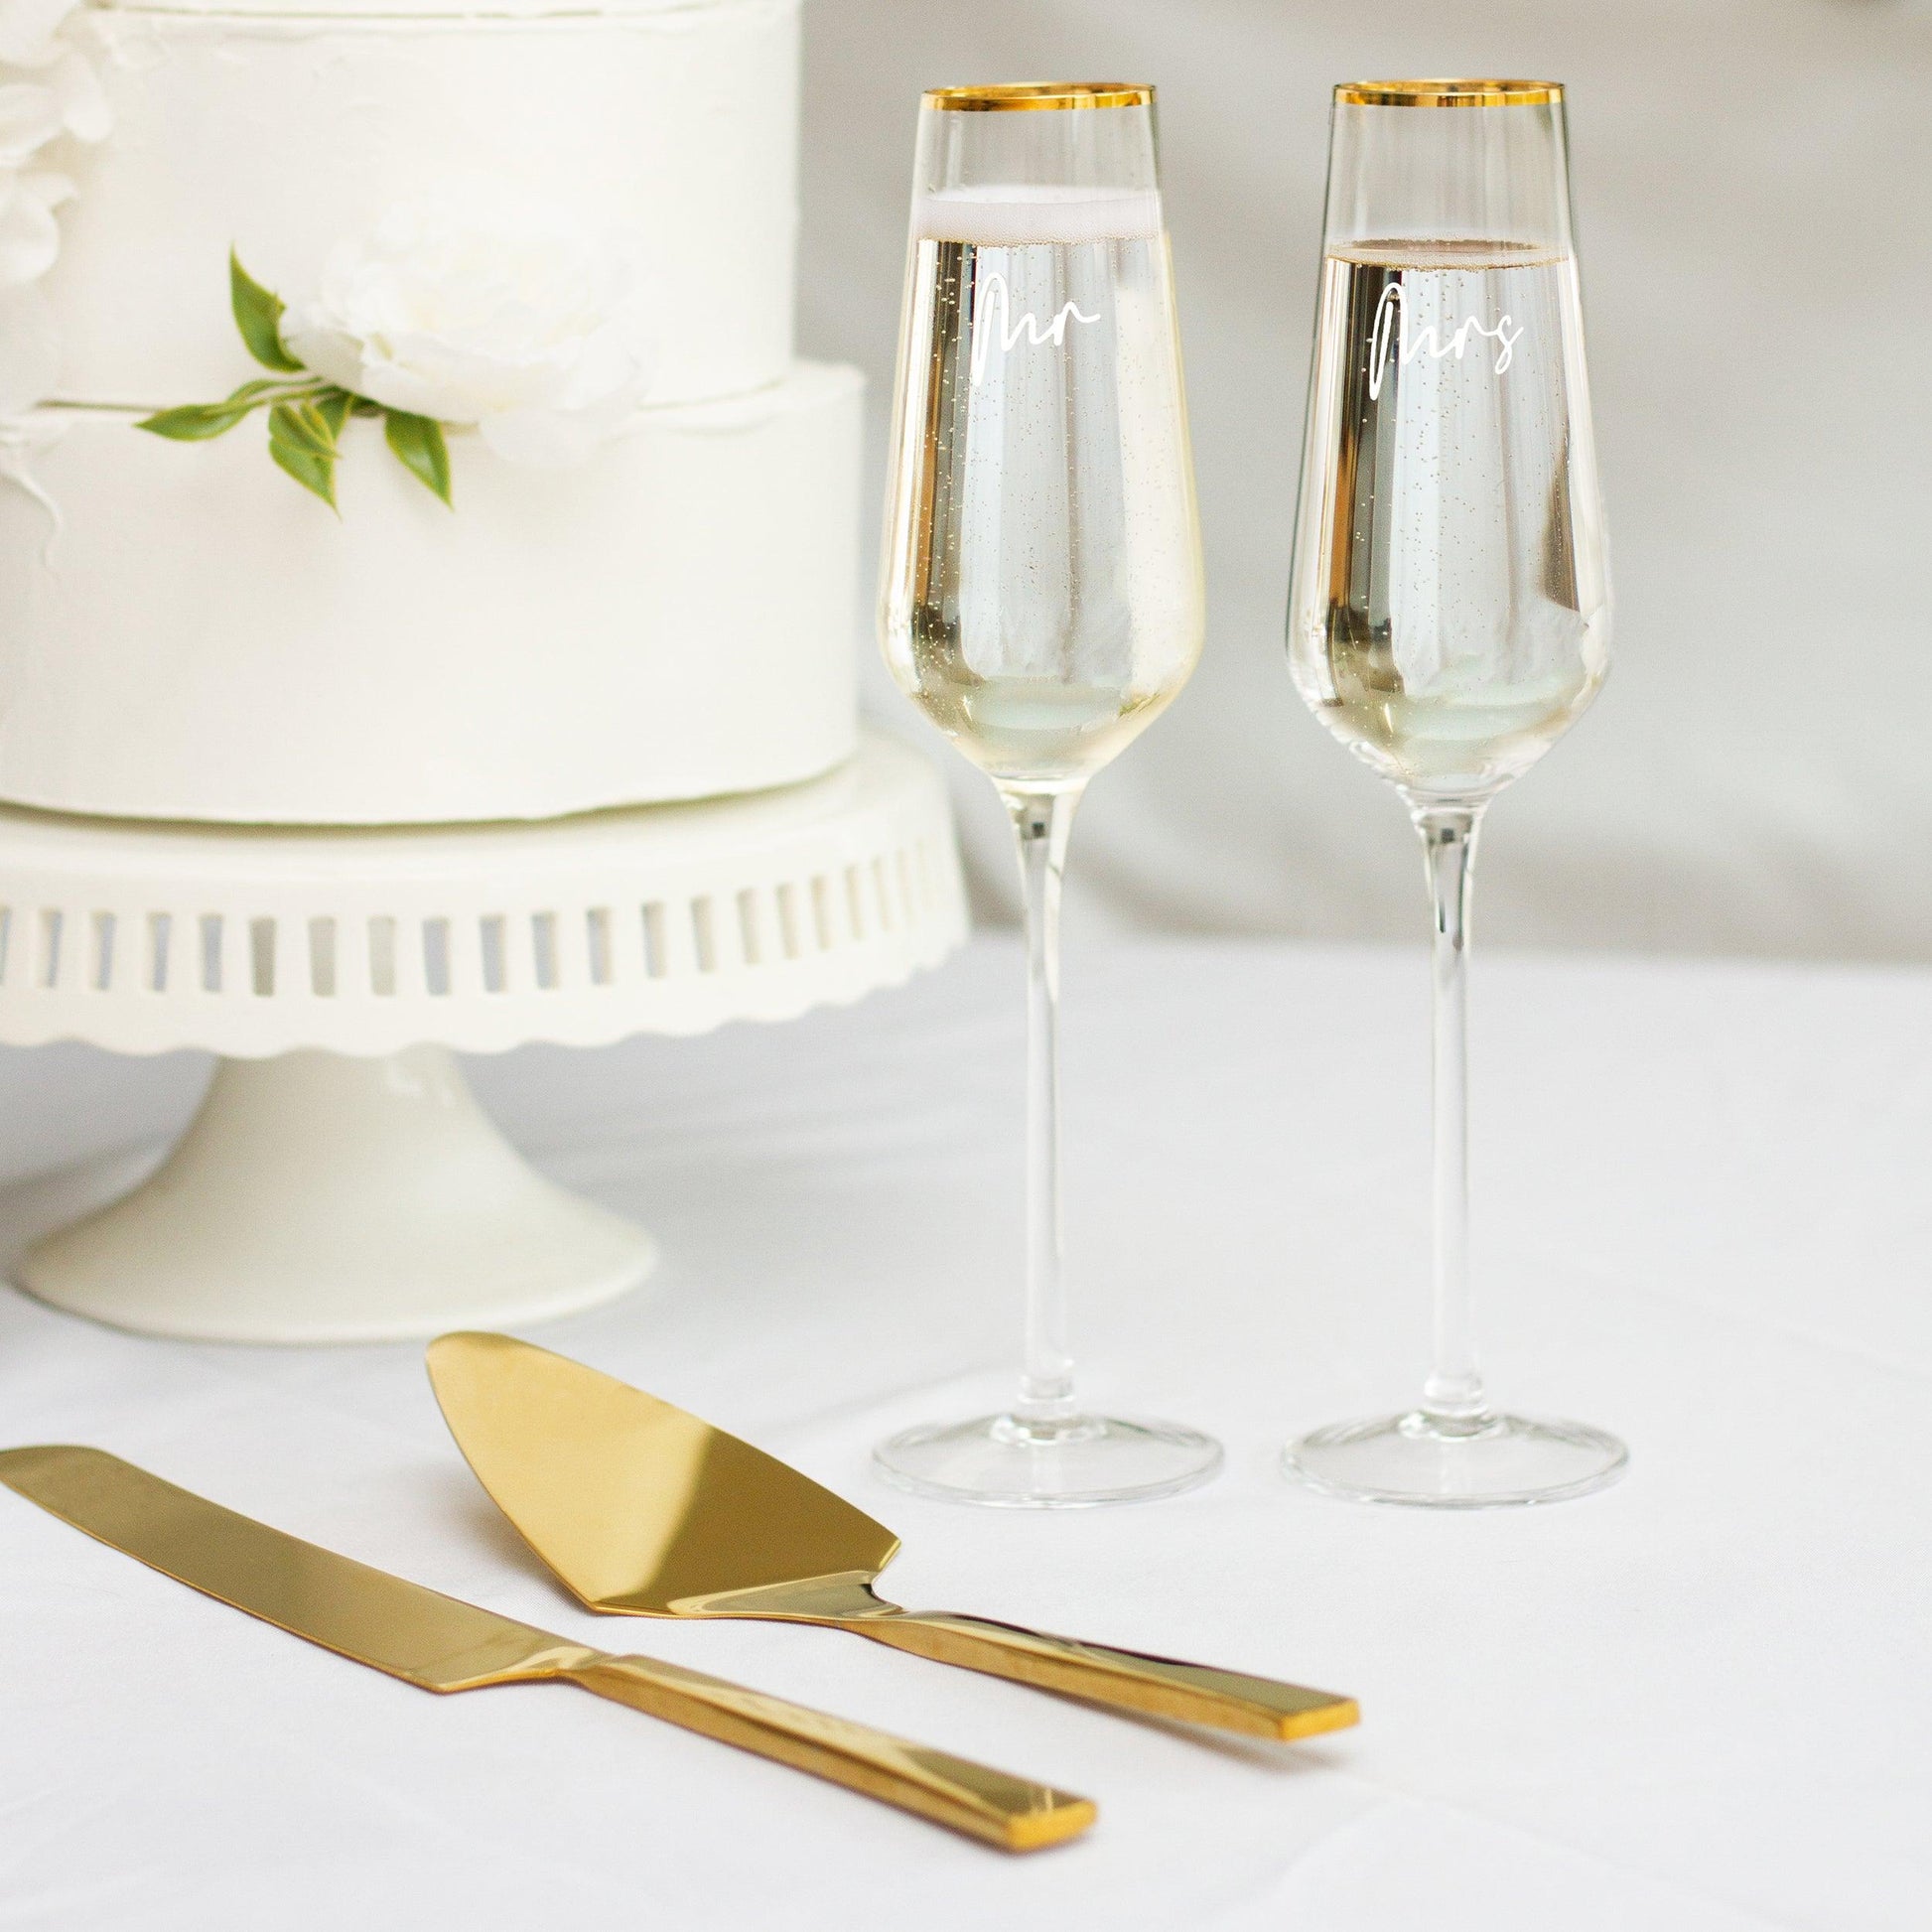 Wedding Cake Knife and Server Set with Champagne Flutes - JAHomesUS